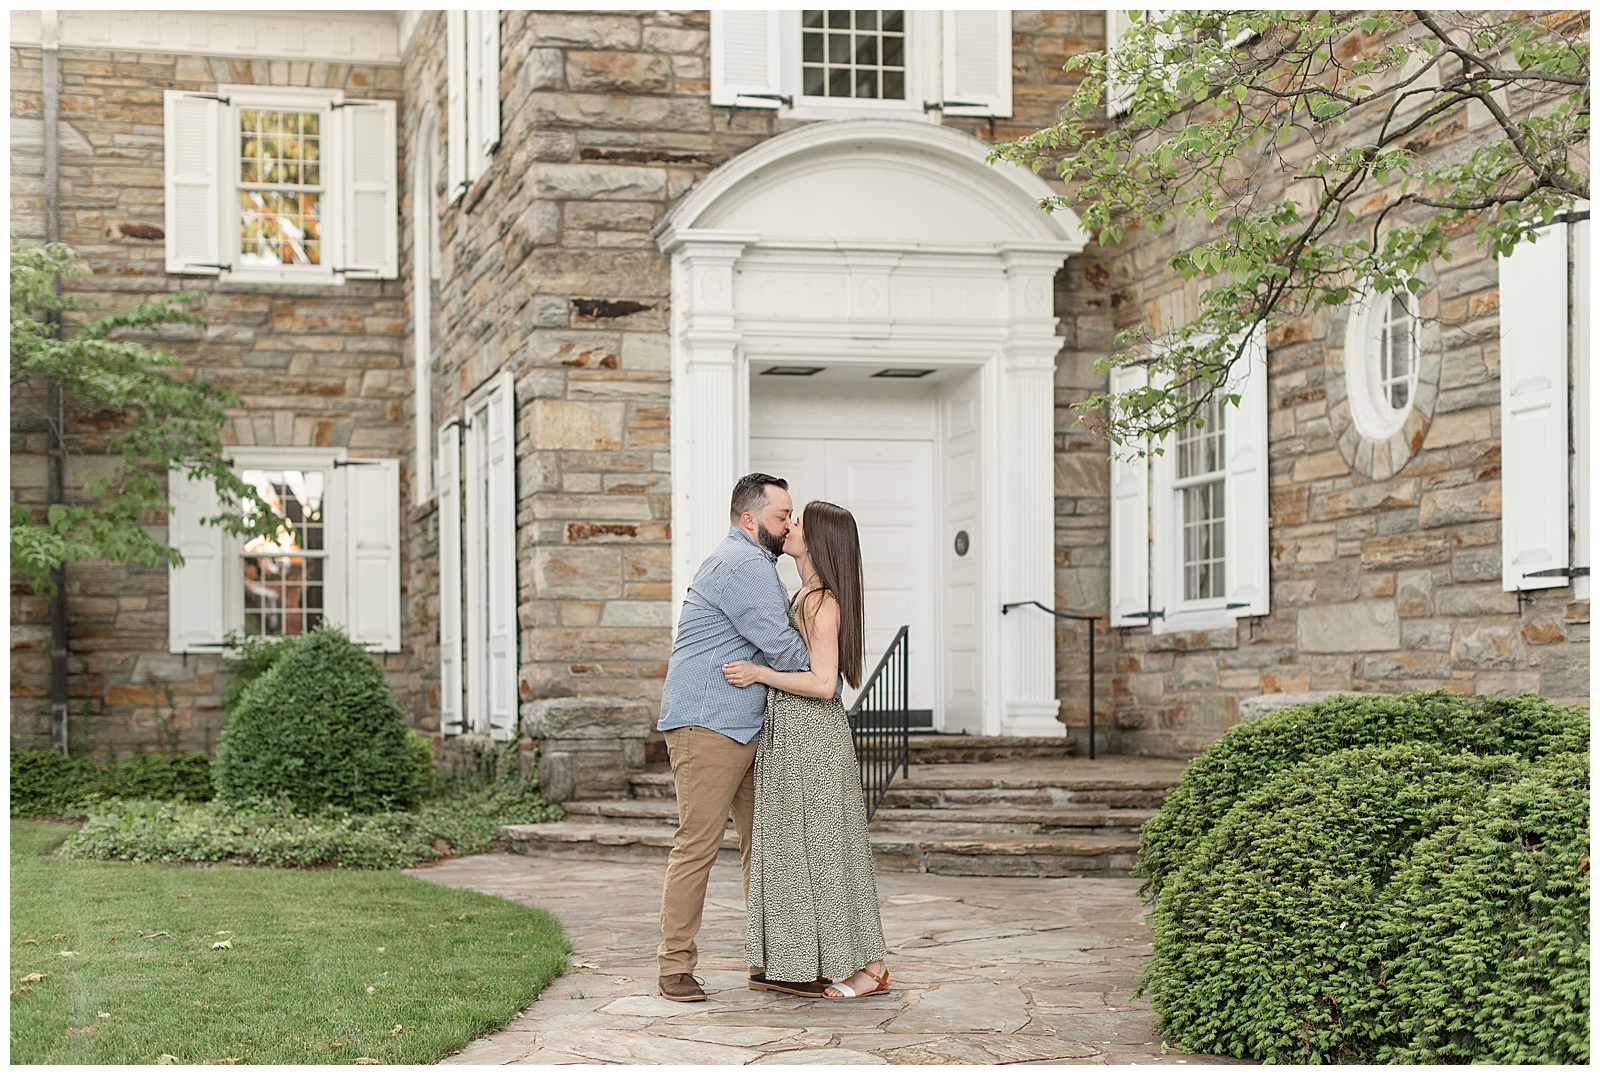 engaged couple hugging and kissing on stone pathway by historic stone building in lititz pennsylvania